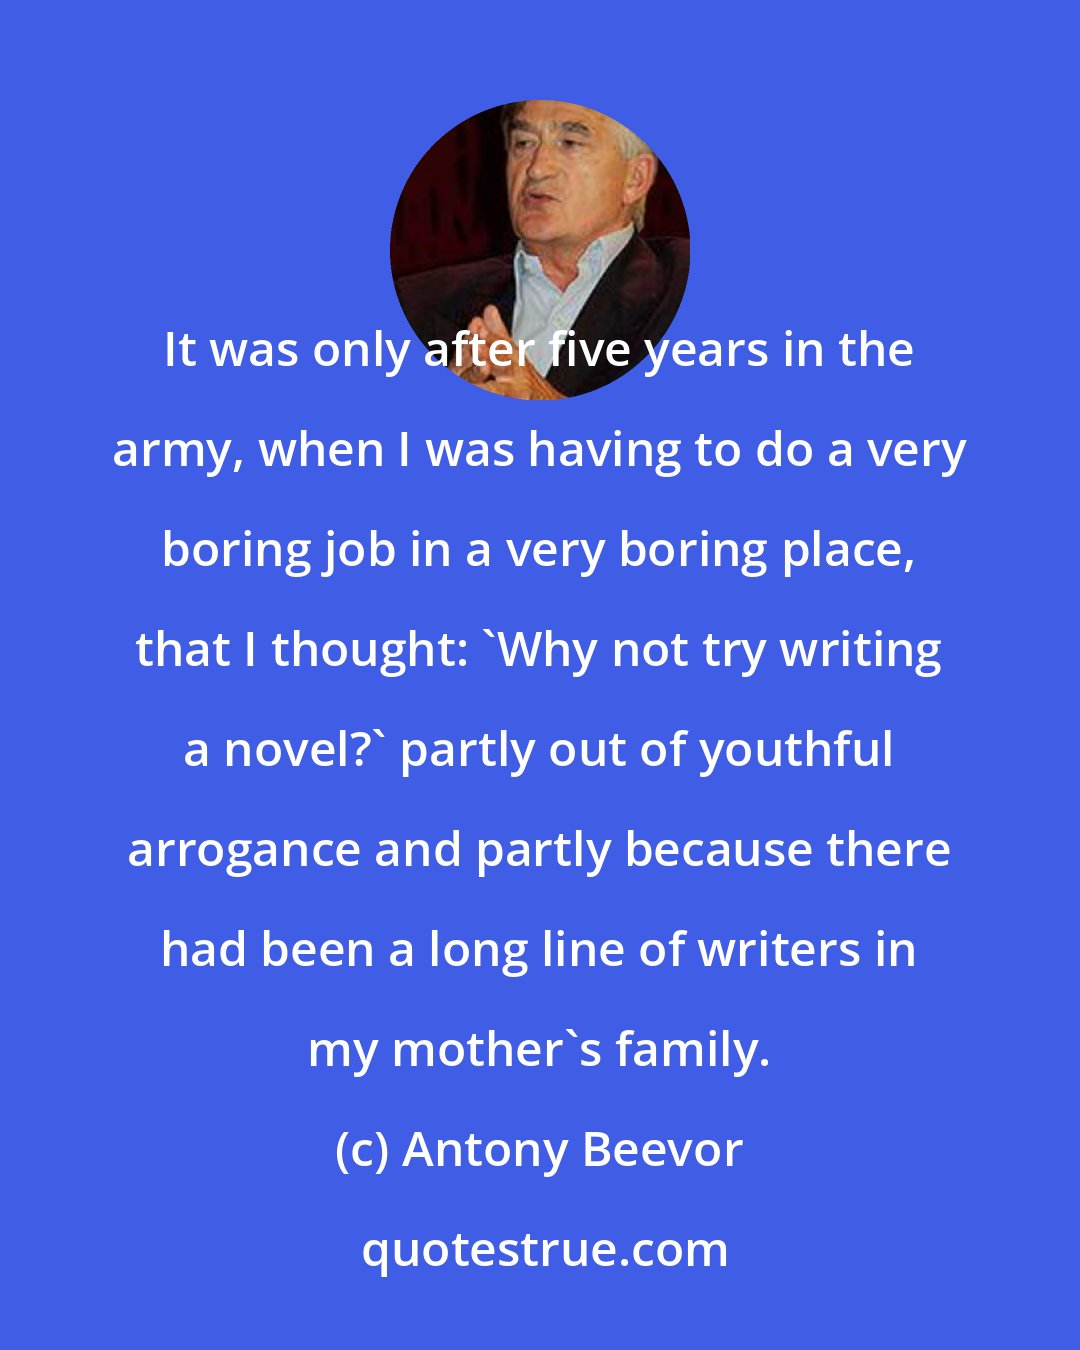 Antony Beevor: It was only after five years in the army, when I was having to do a very boring job in a very boring place, that I thought: 'Why not try writing a novel?' partly out of youthful arrogance and partly because there had been a long line of writers in my mother's family.